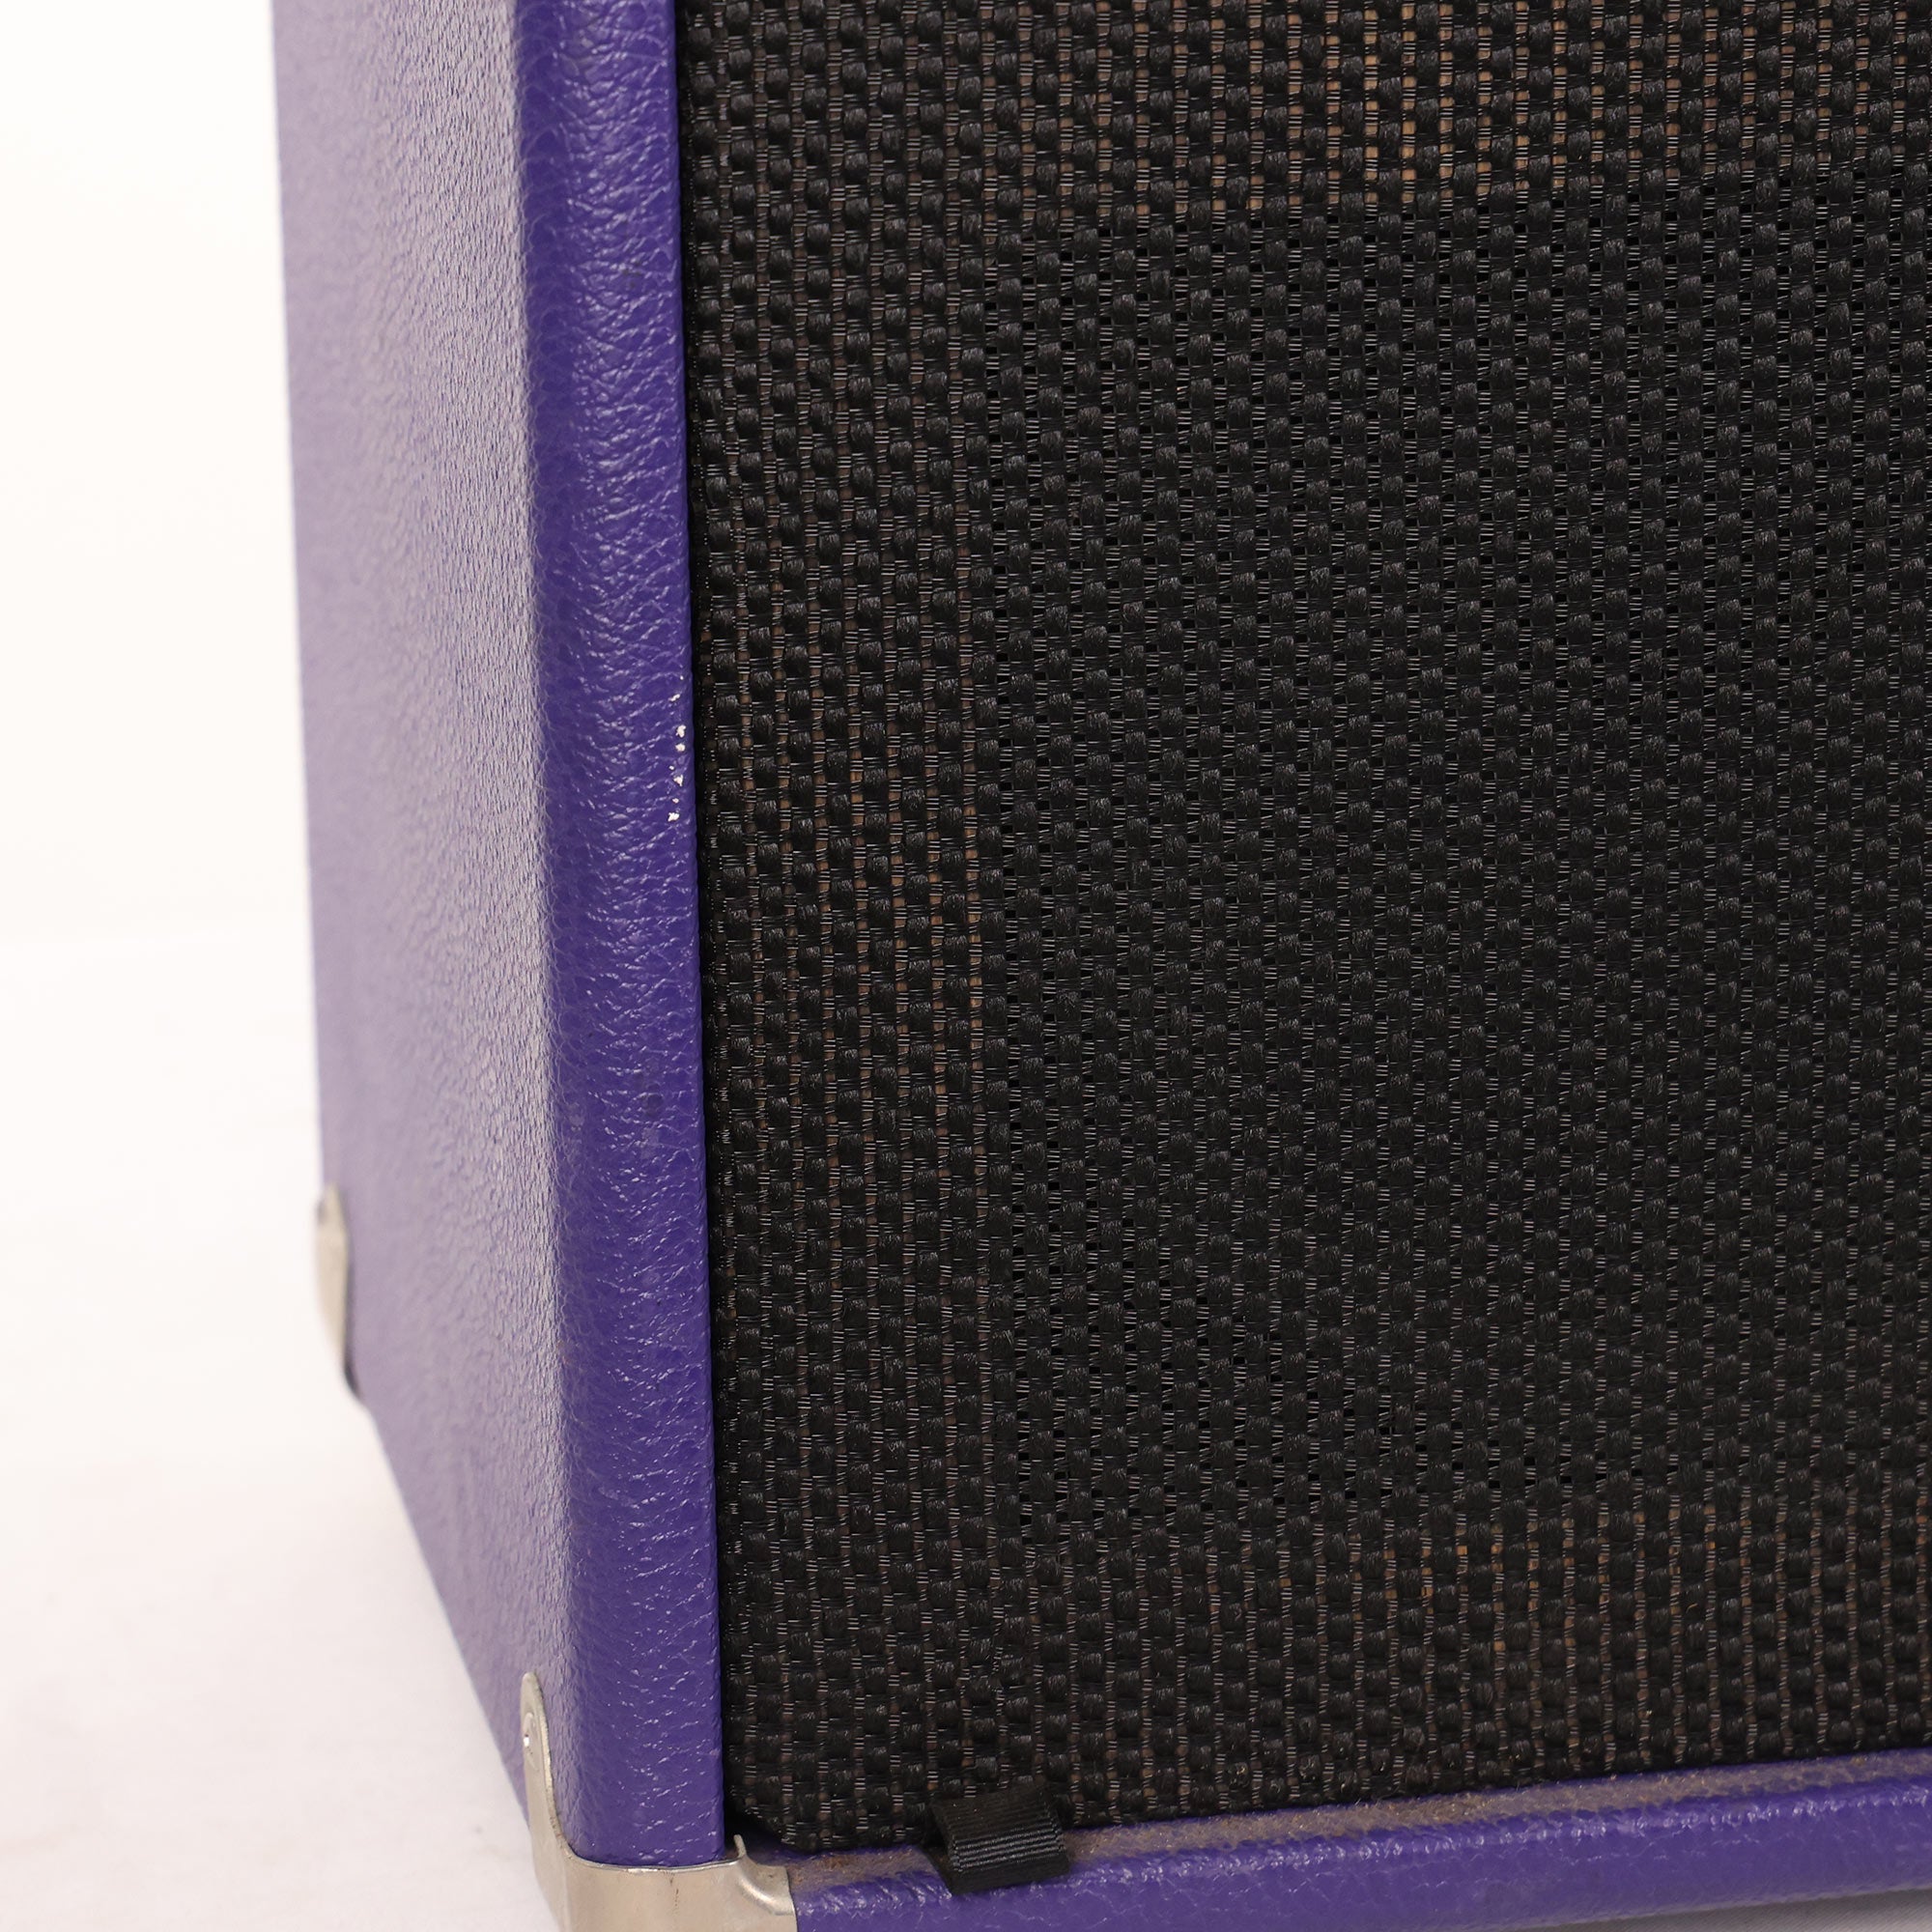 Soldano Astroverb 16 2x12 Combo Amplifier | The Music Zoo